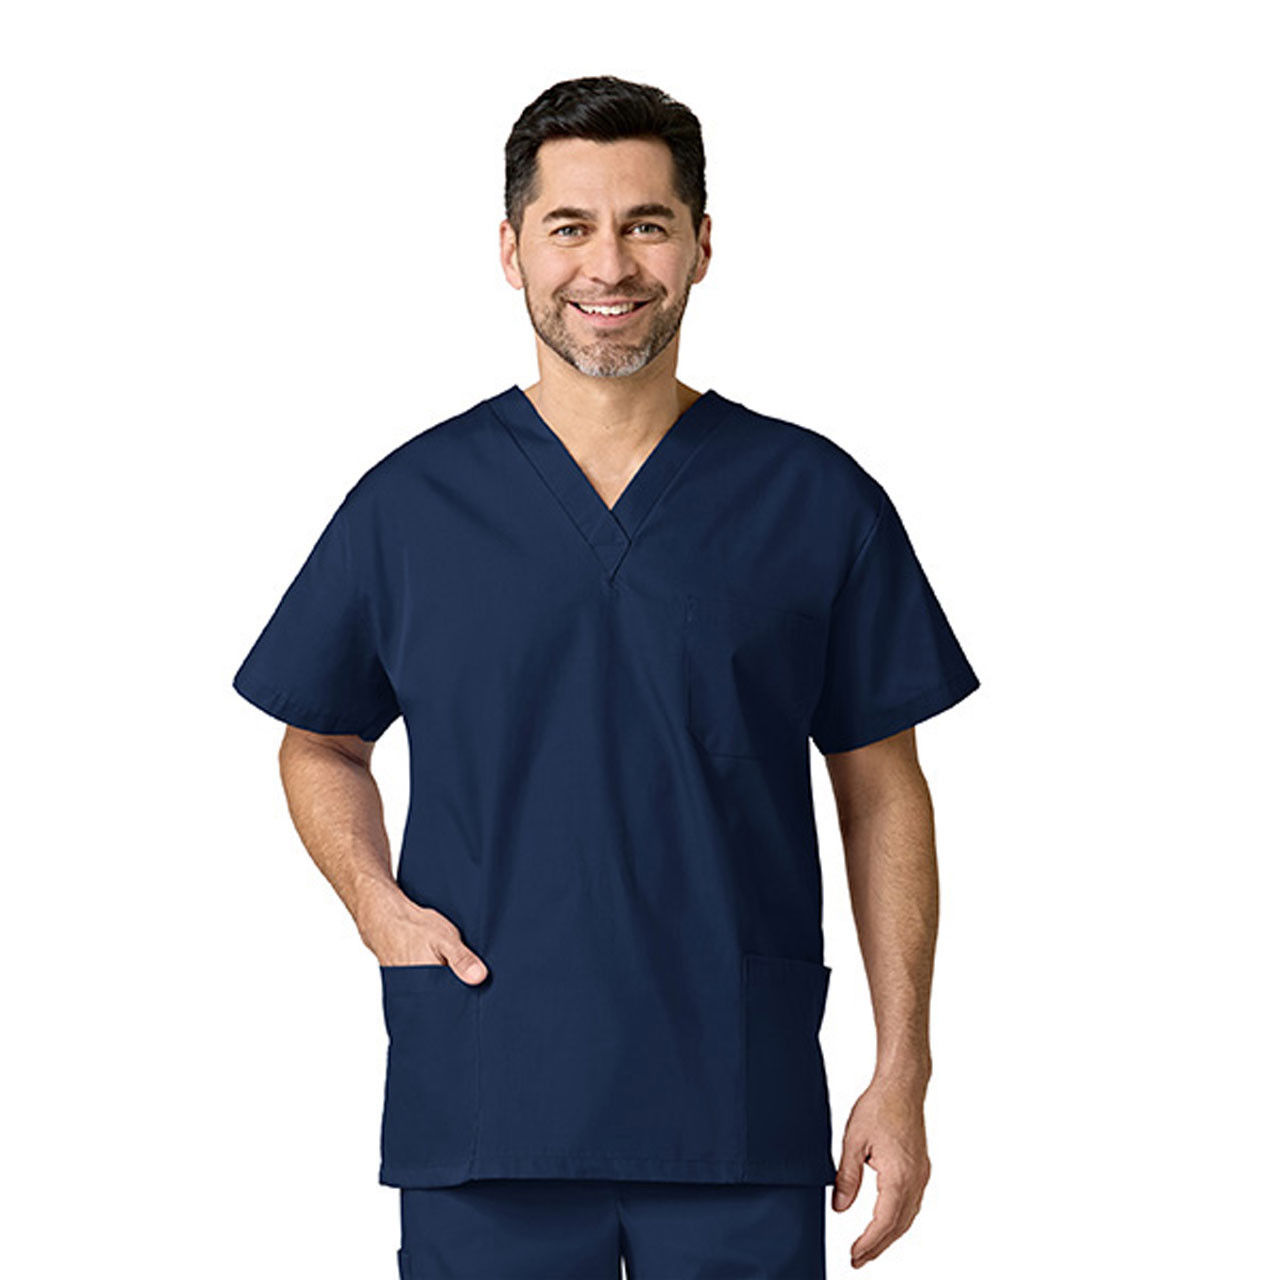 What is the material composition of the Navy Blue Scrub Tops?